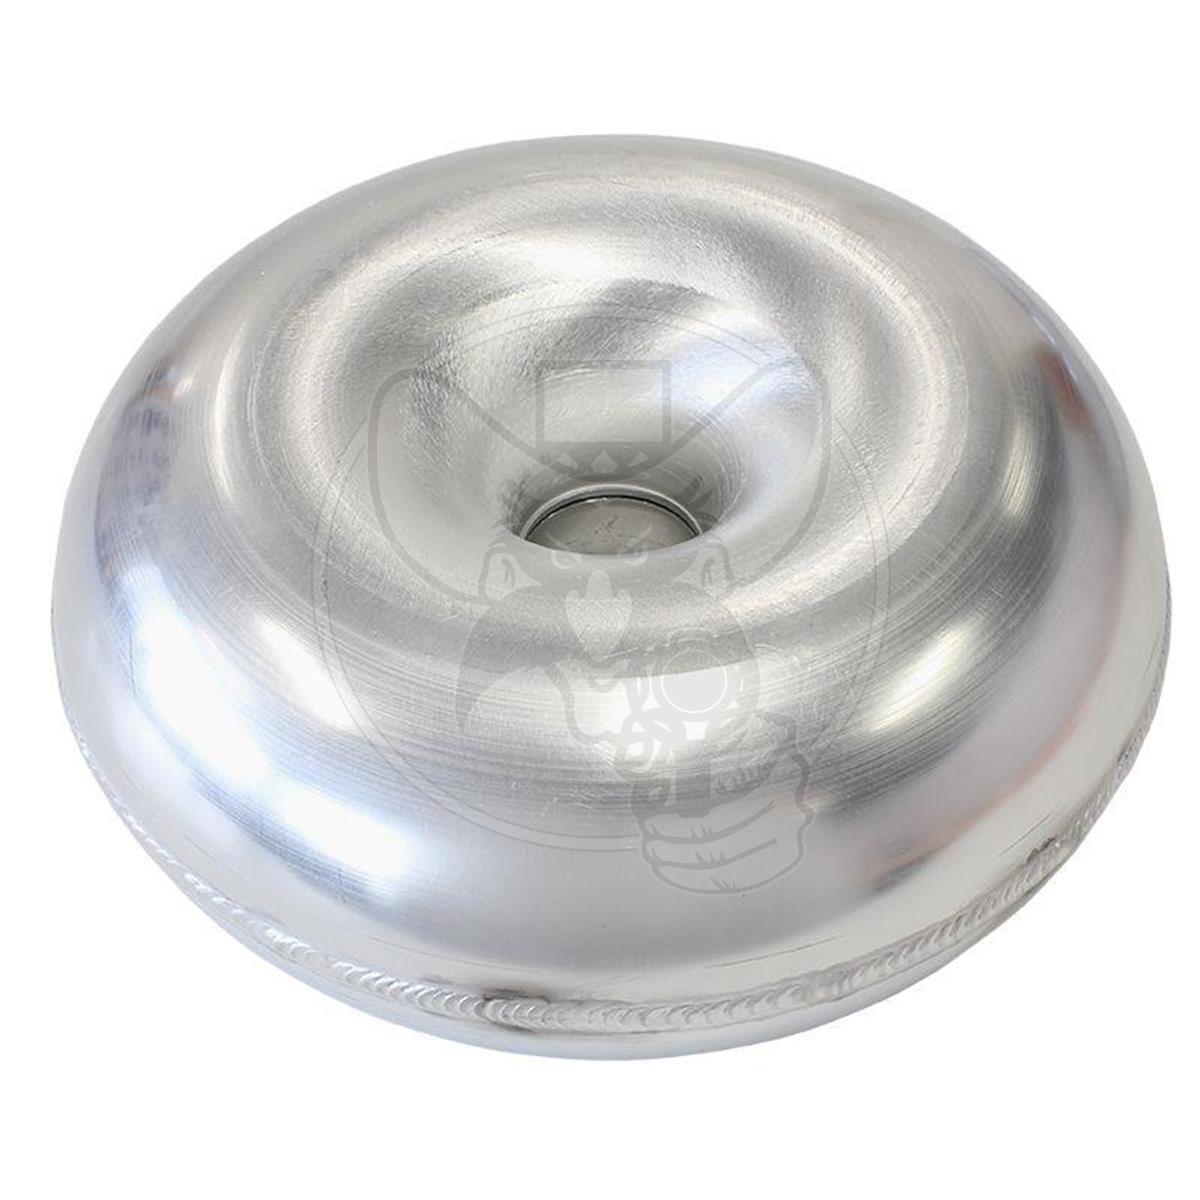 AEROFLOW ALUMINIUM DONUT 4" WELDED TOGETHER OUTSIDE WELD ONLY